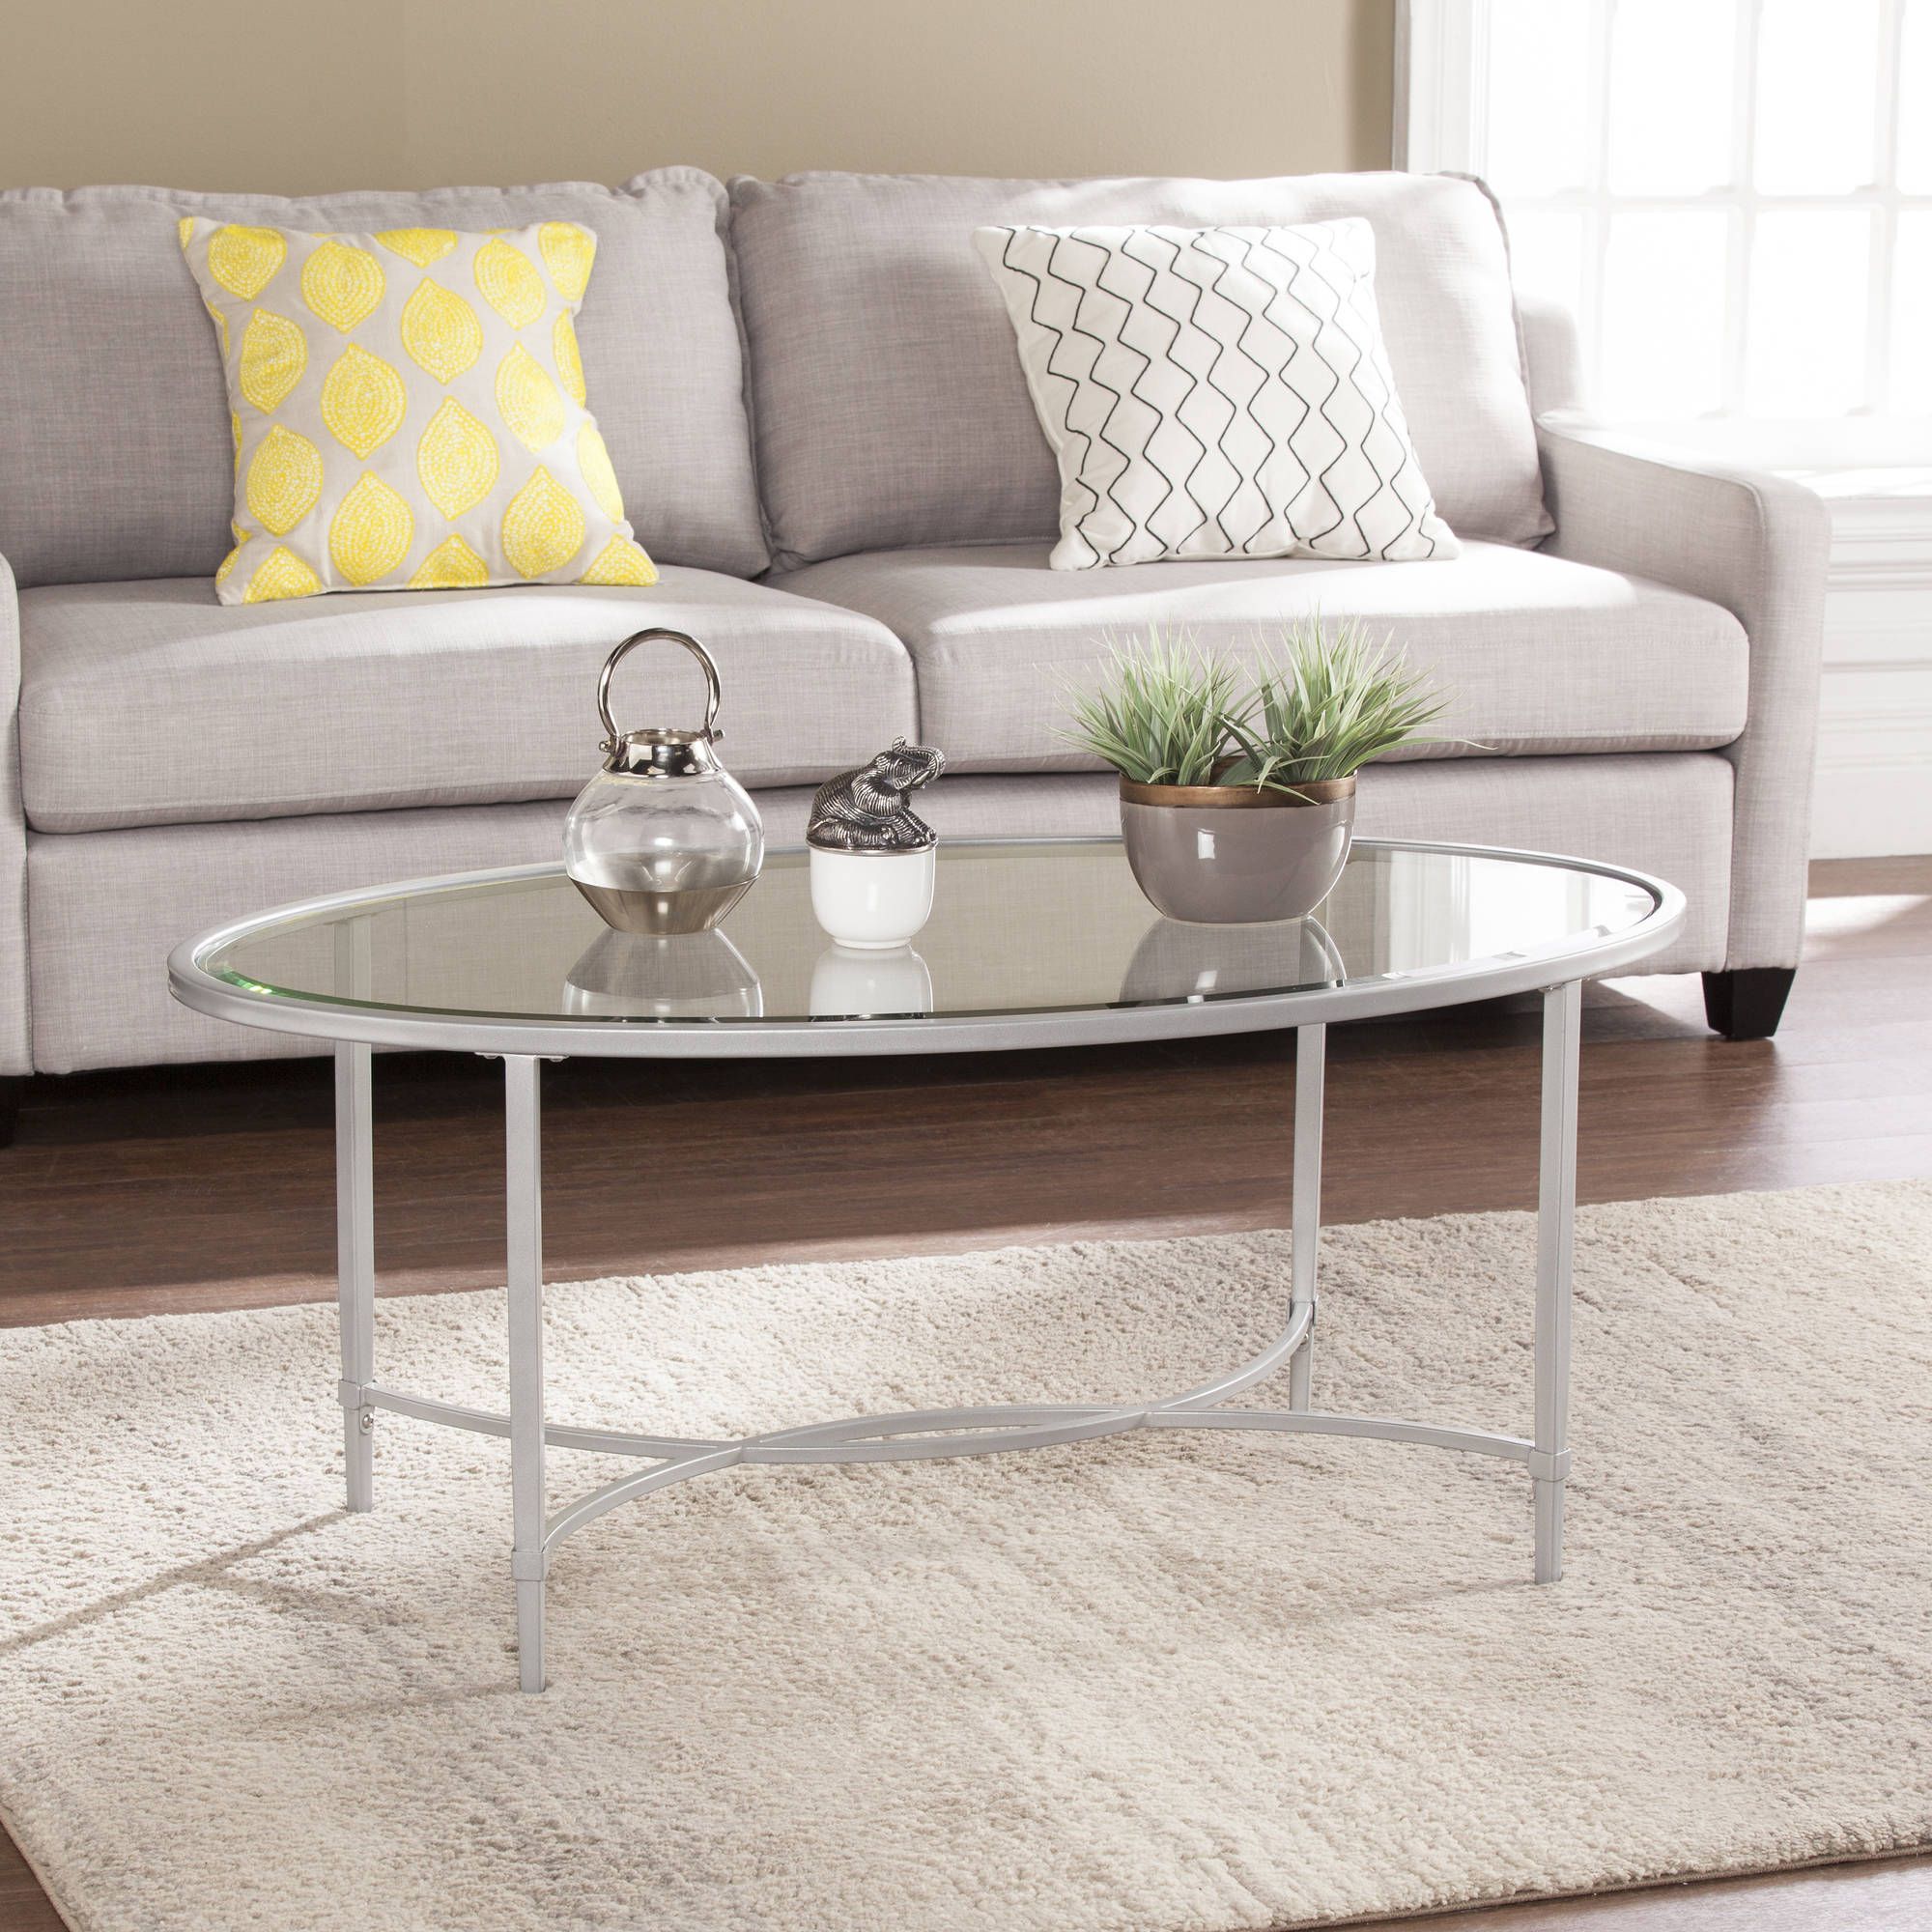 Quibilah Metal/glass Oval Coffee Table, Silver – Walmart With Preferred Metallic Silver Cocktail Tables (Gallery 7 of 20)